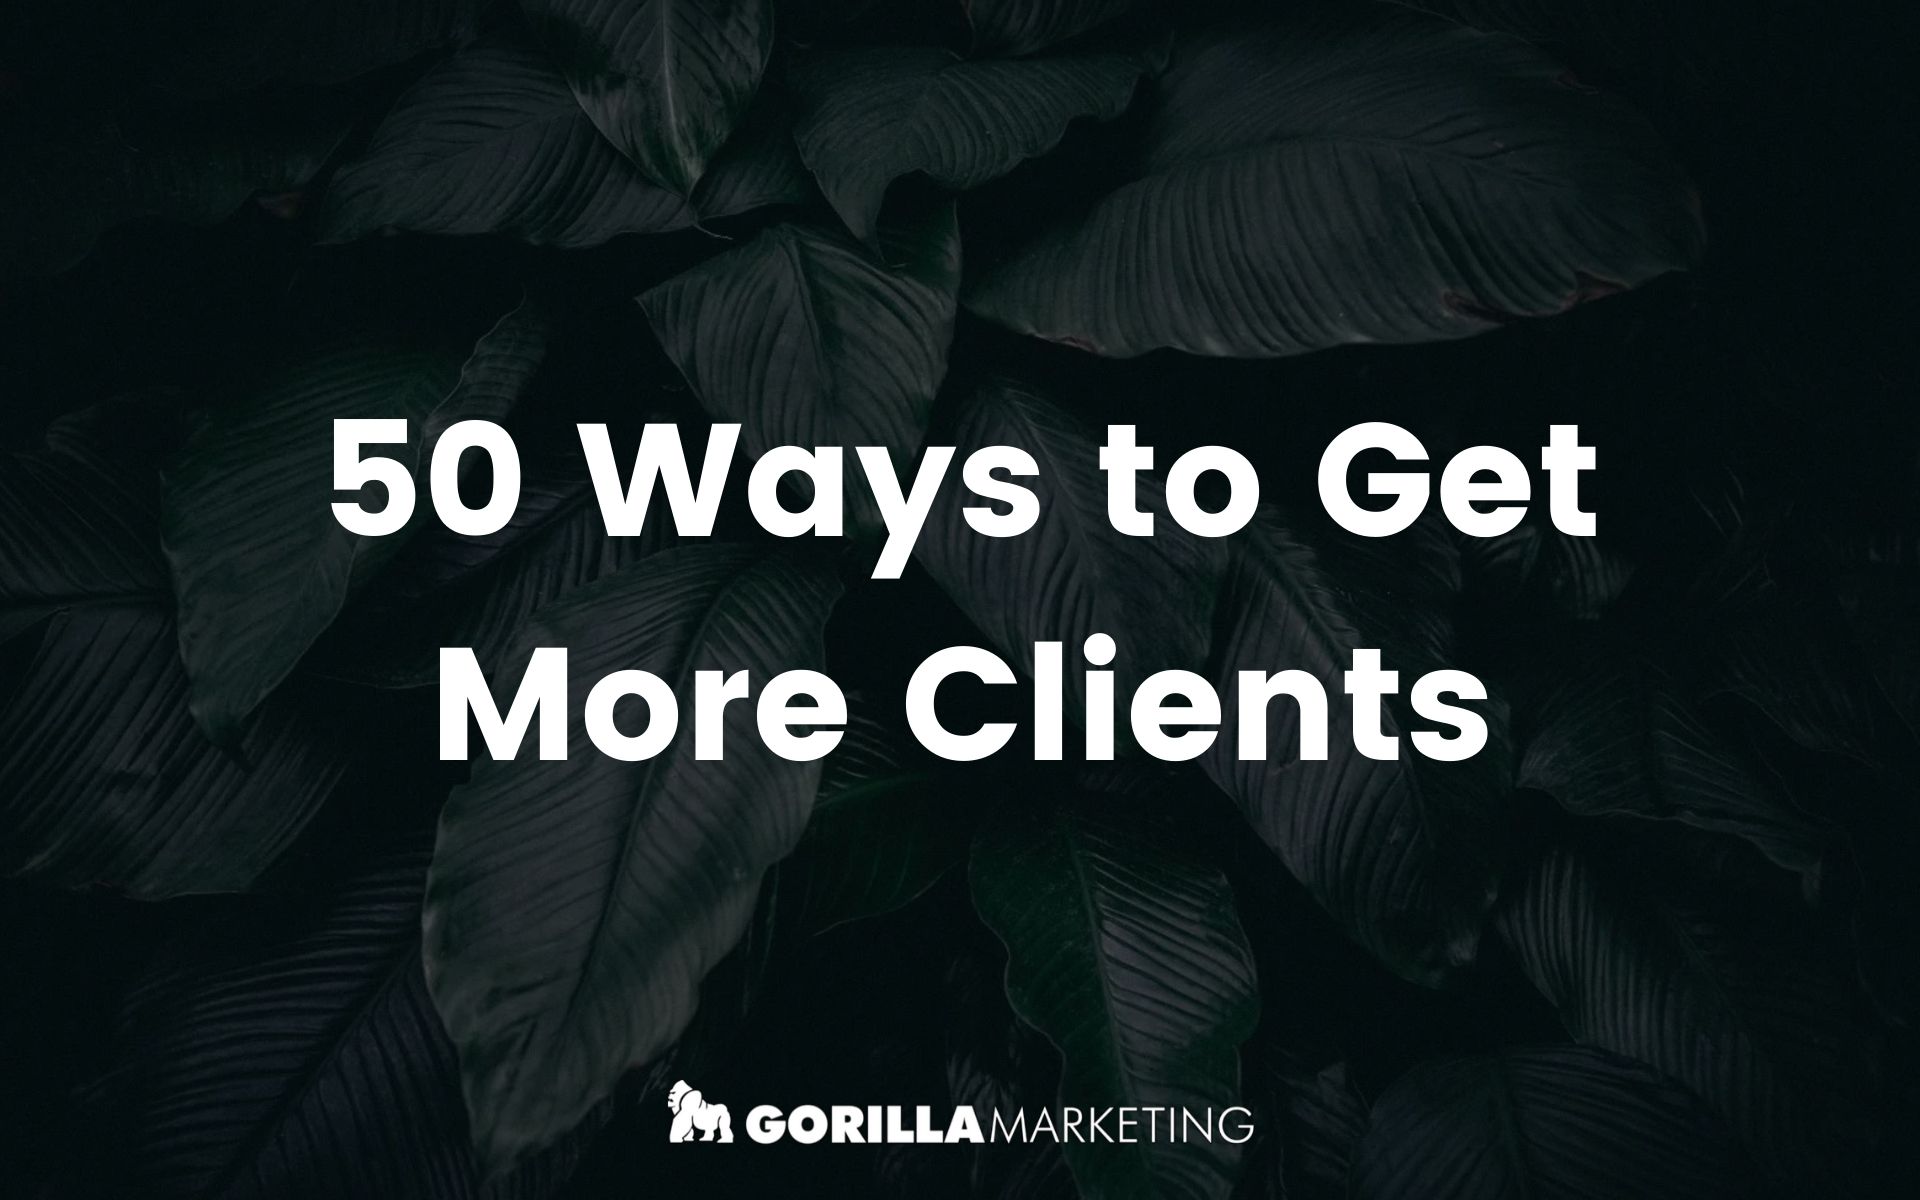 50 Ways to get more clients